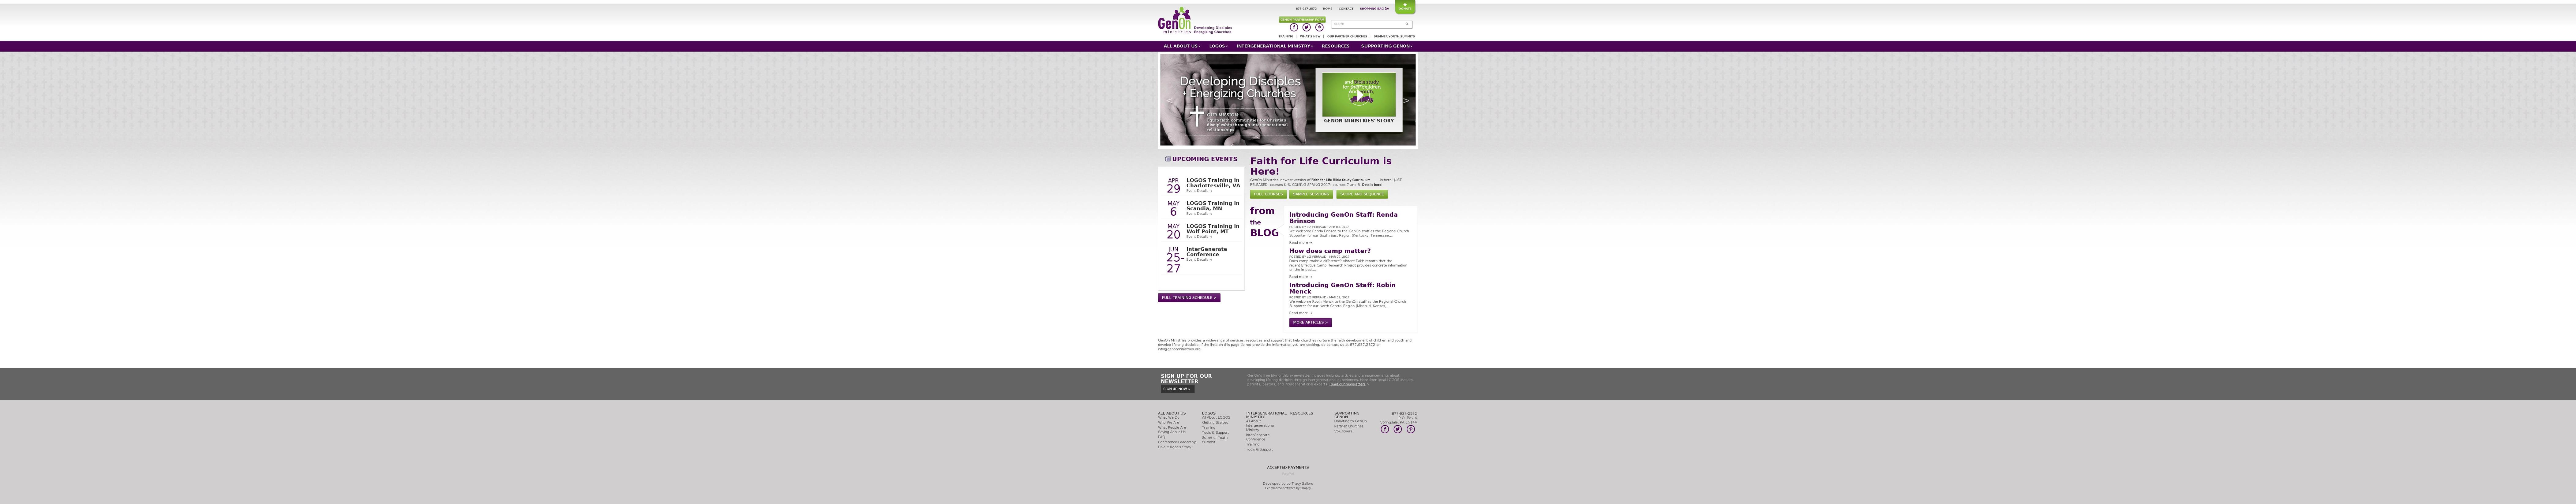 GenOn Theme Shopify theme site example intergenerationalministry.net